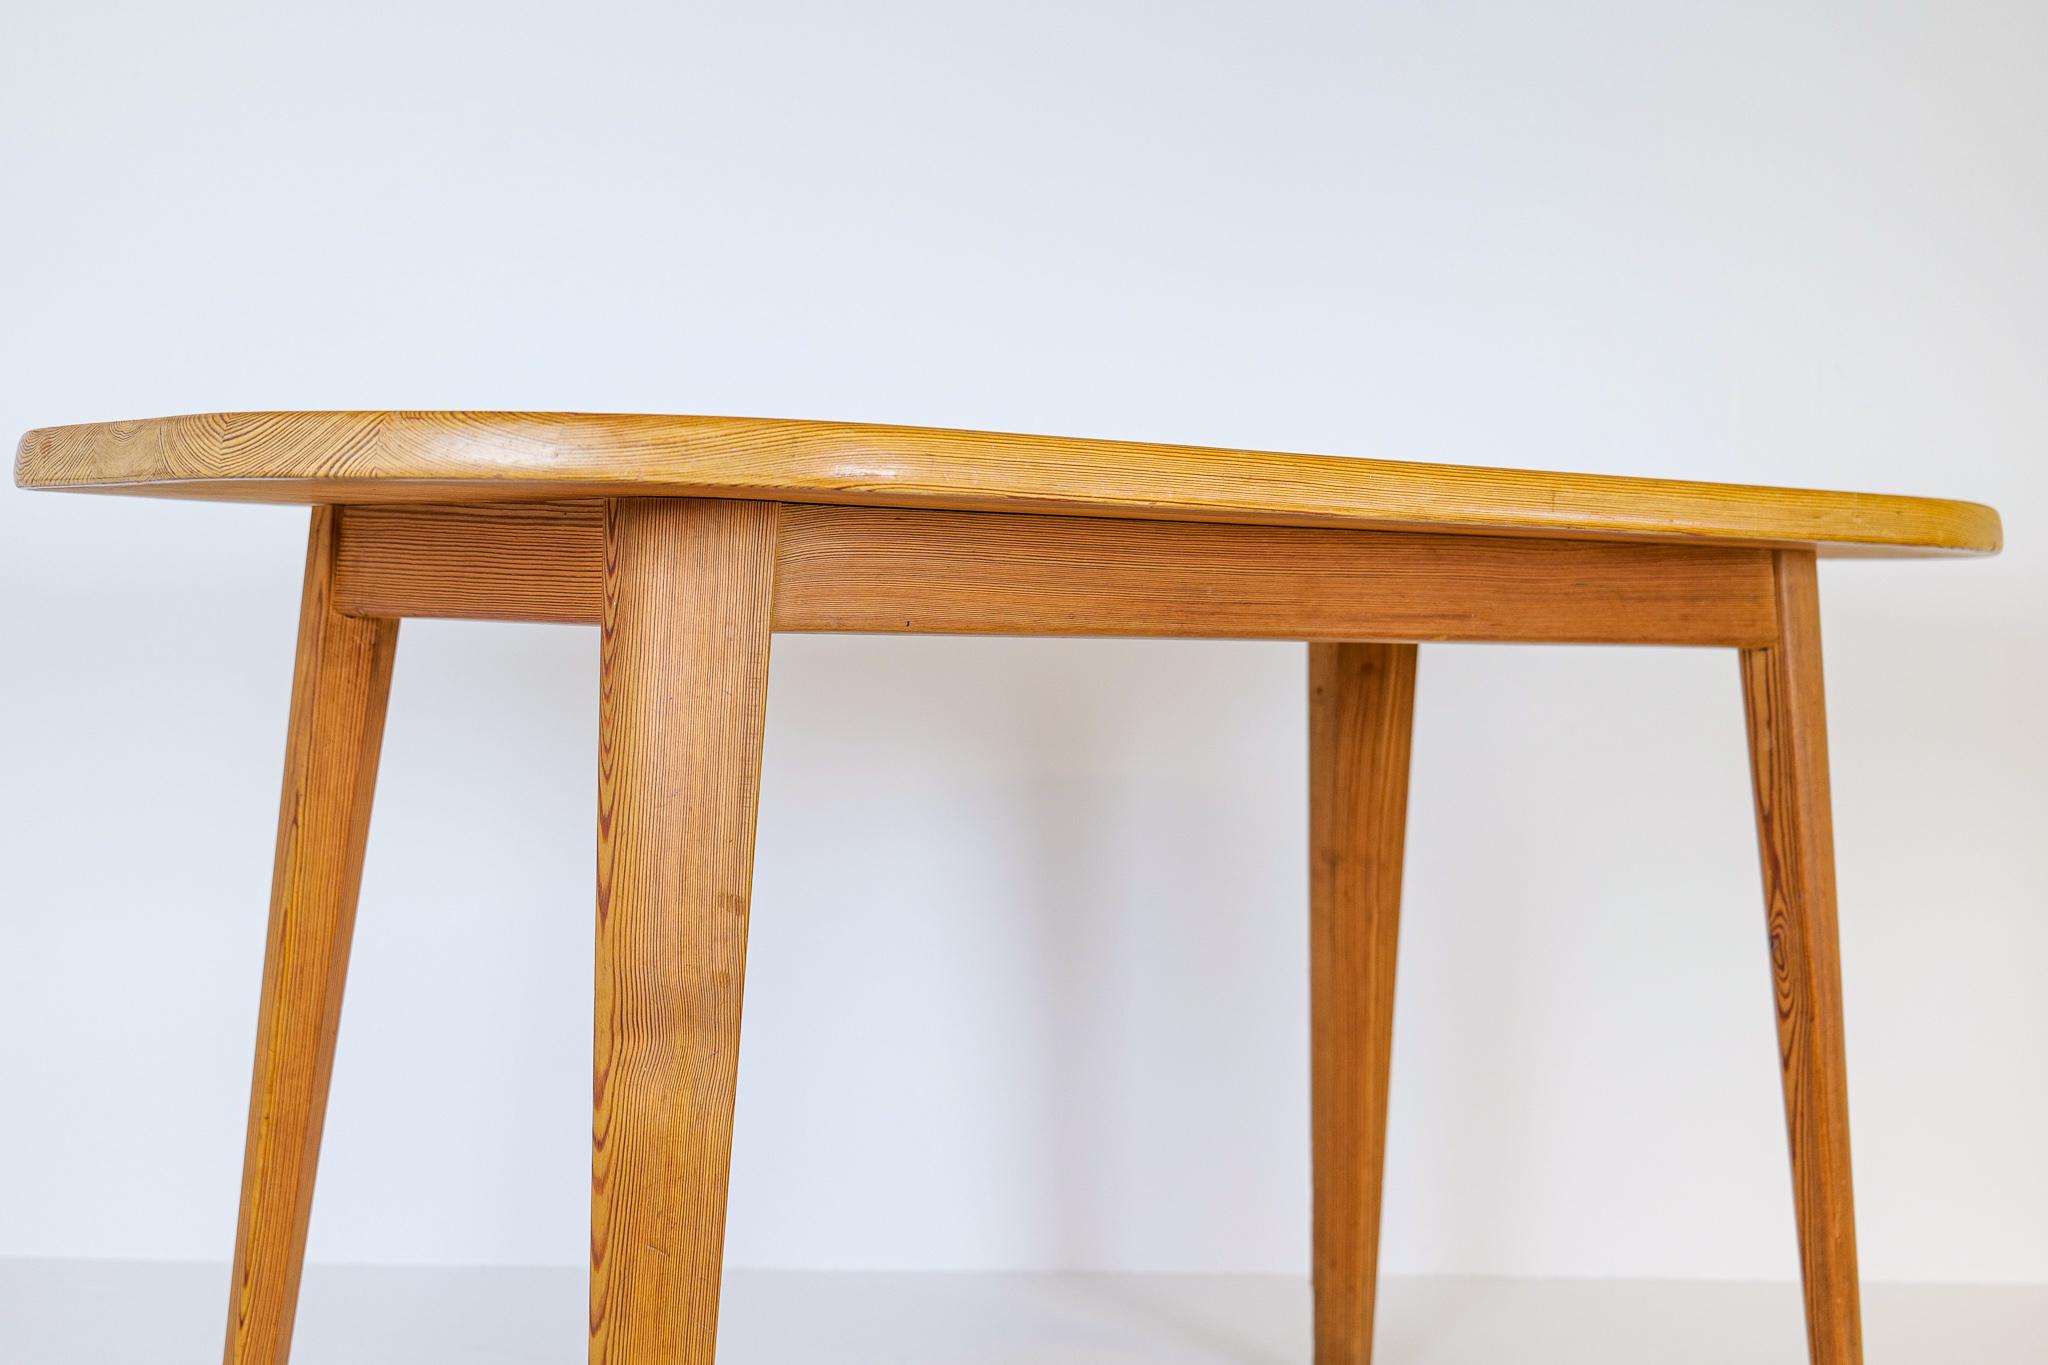 Swedish Midcentury Pine Coffee Table by Carl Malmsten, Sweden, 1940s For Sale